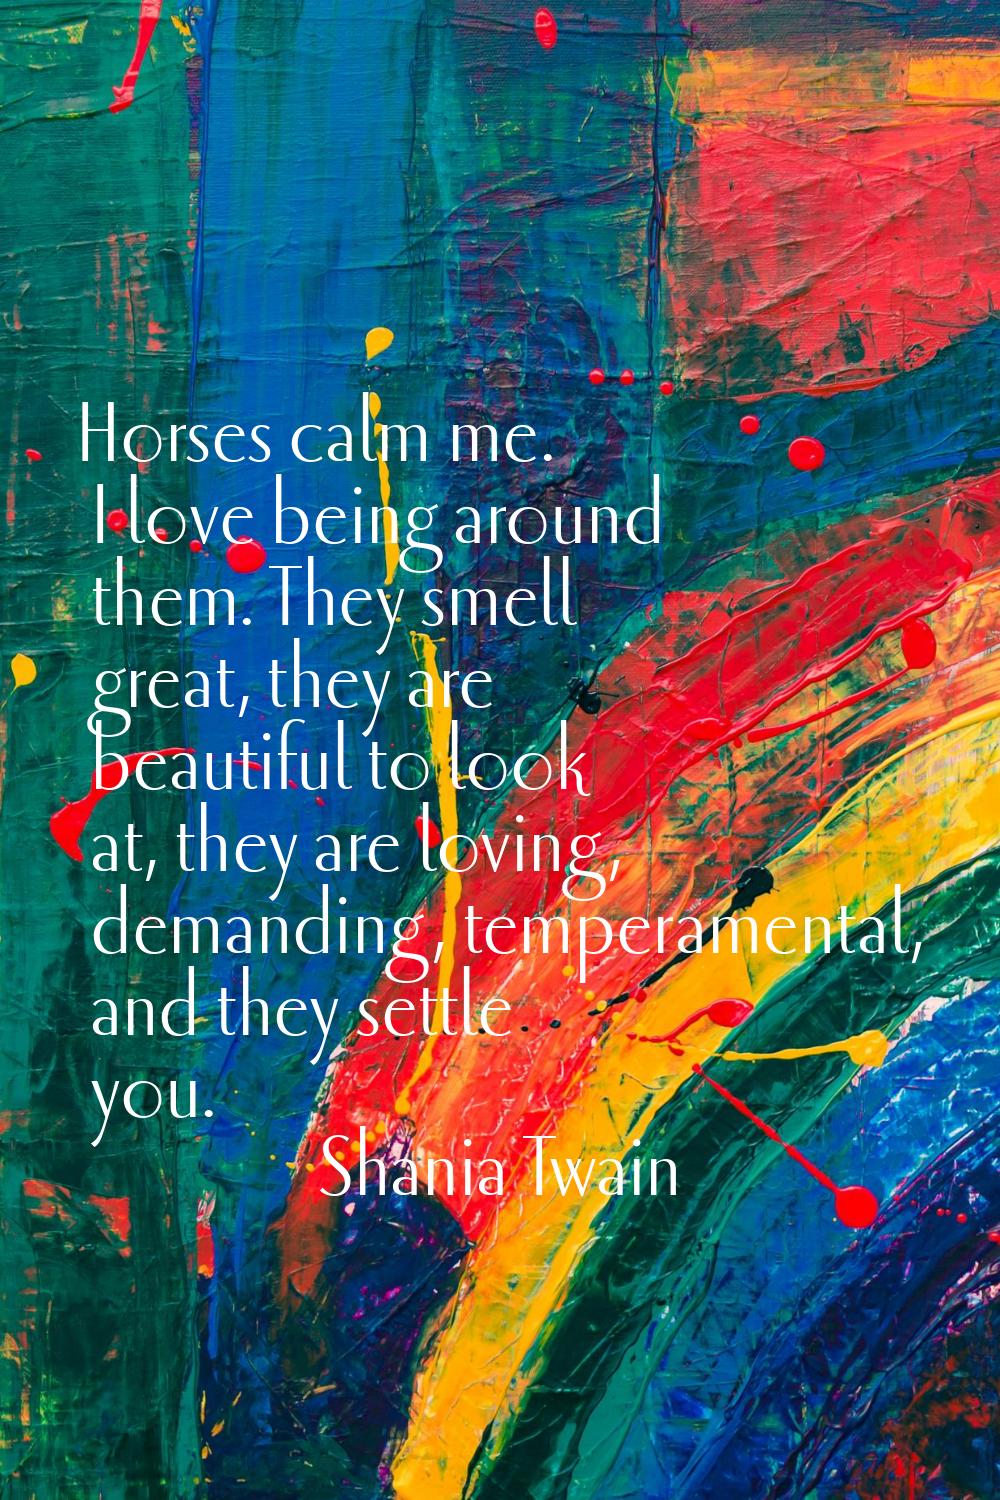 Horses calm me. I love being around them. They smell great, they are beautiful to look at, they are